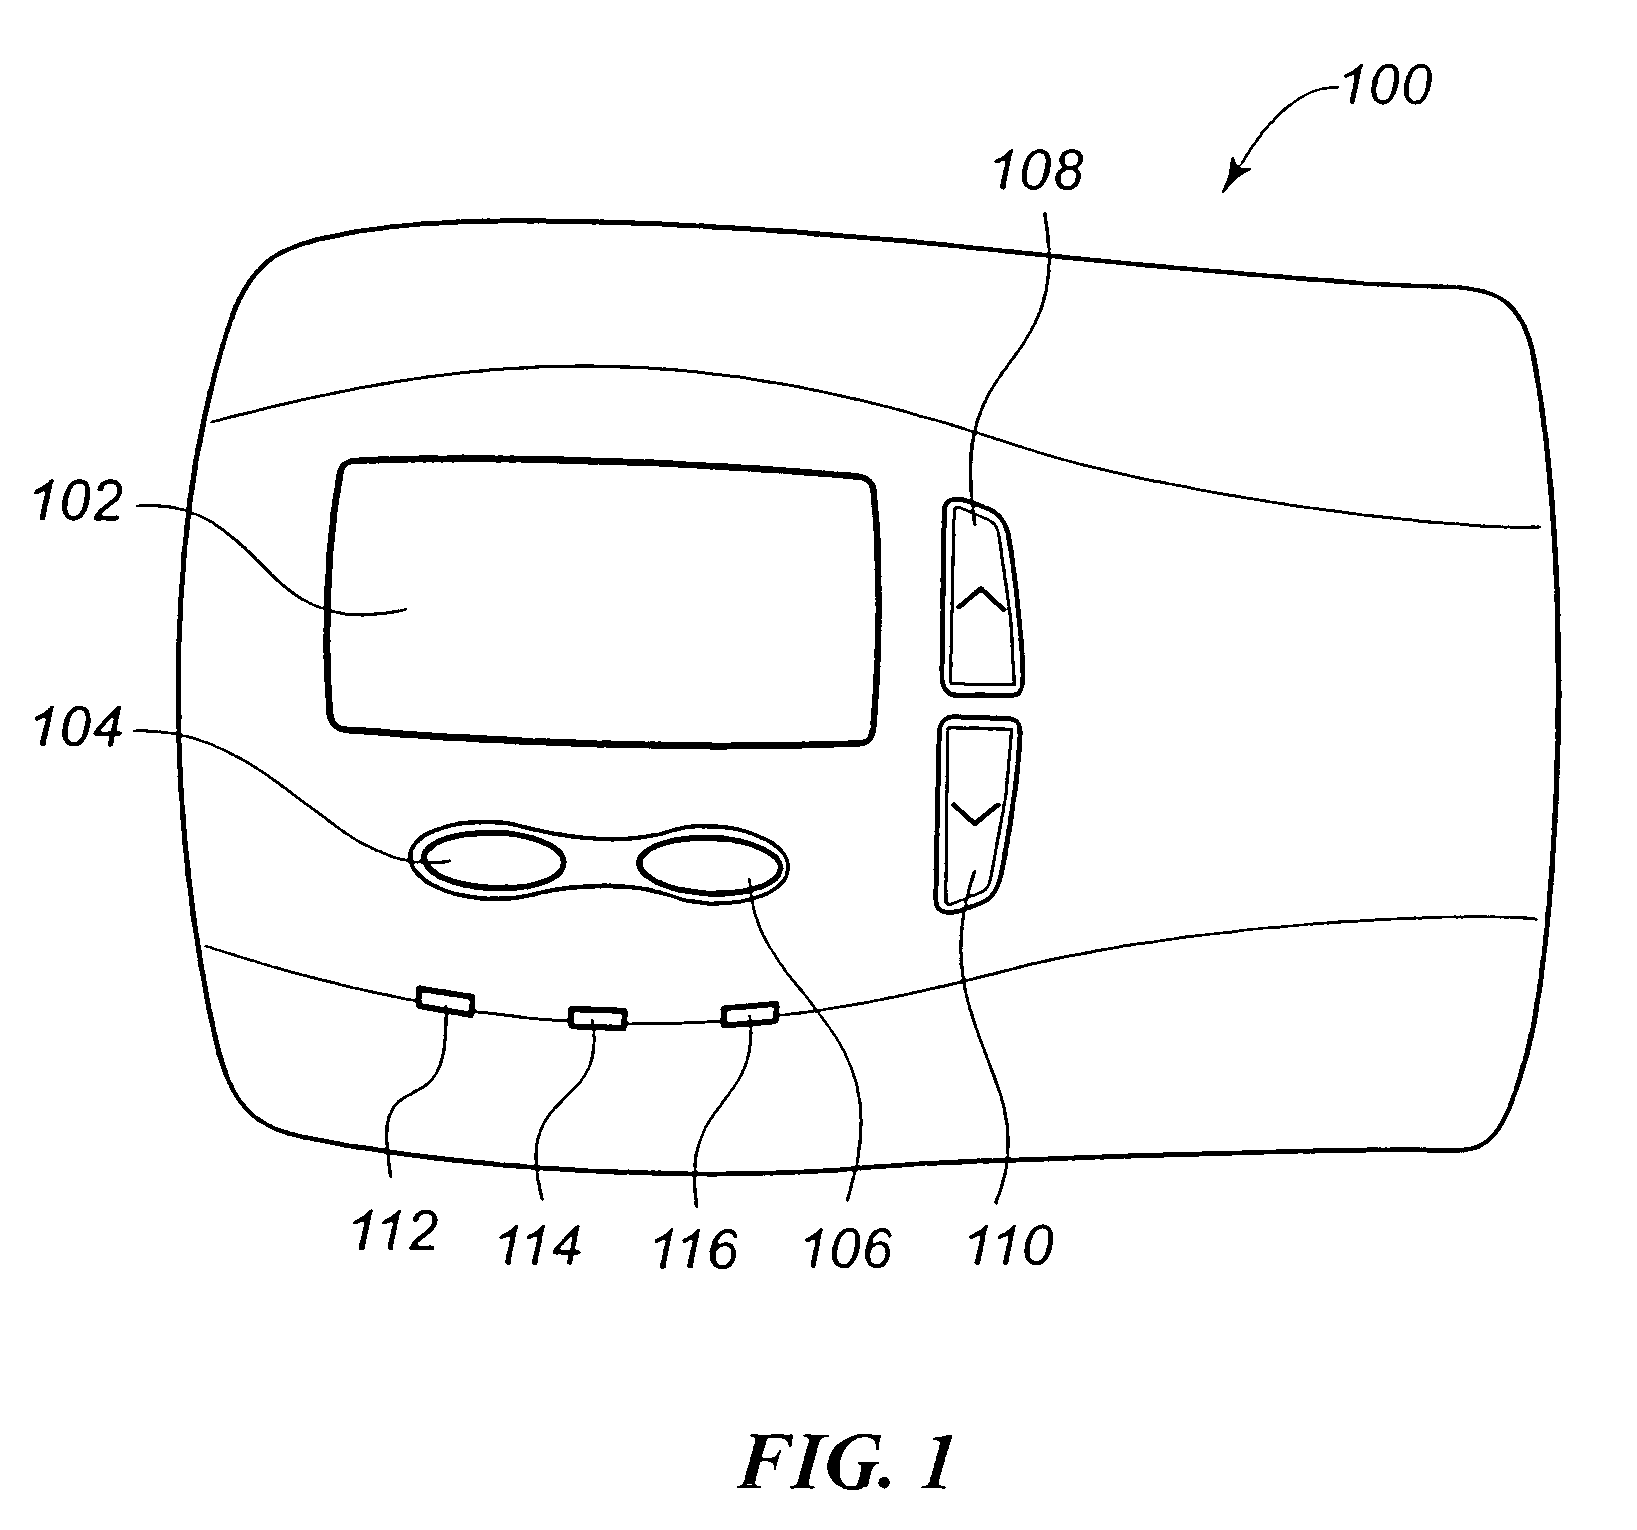 Occupancy-based zoning climate control system and method